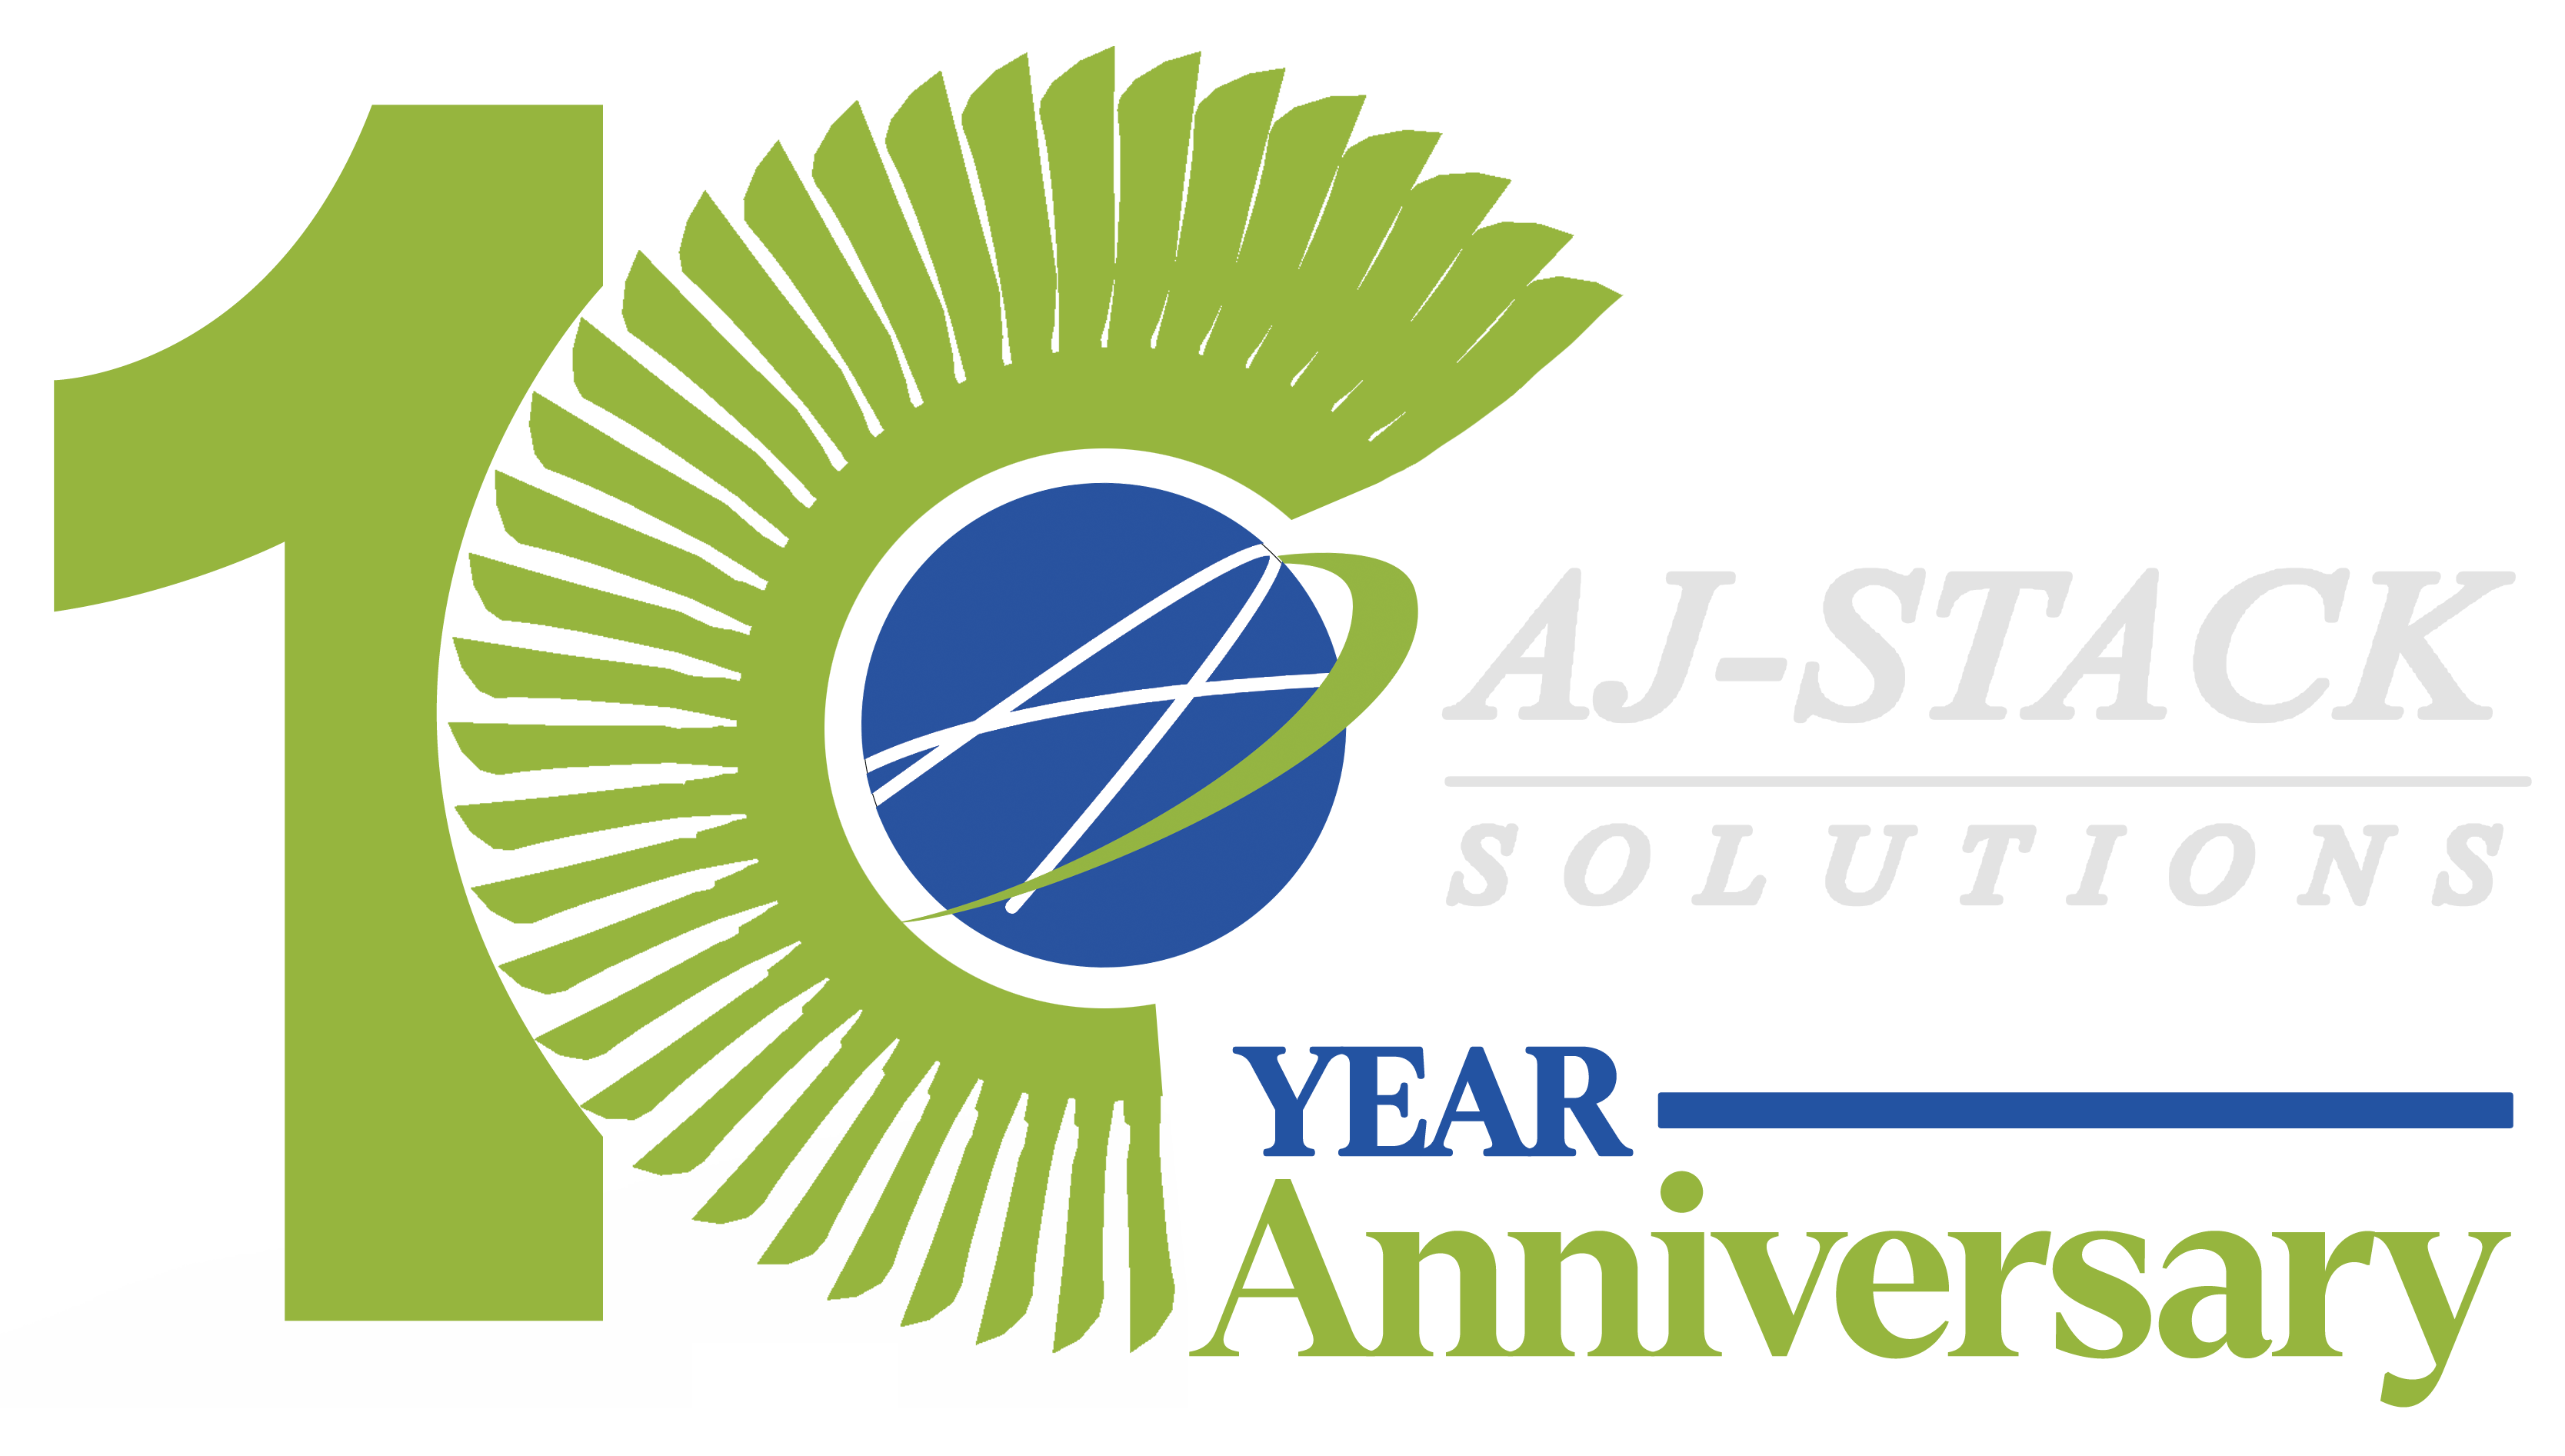 AJ Stack Solutions